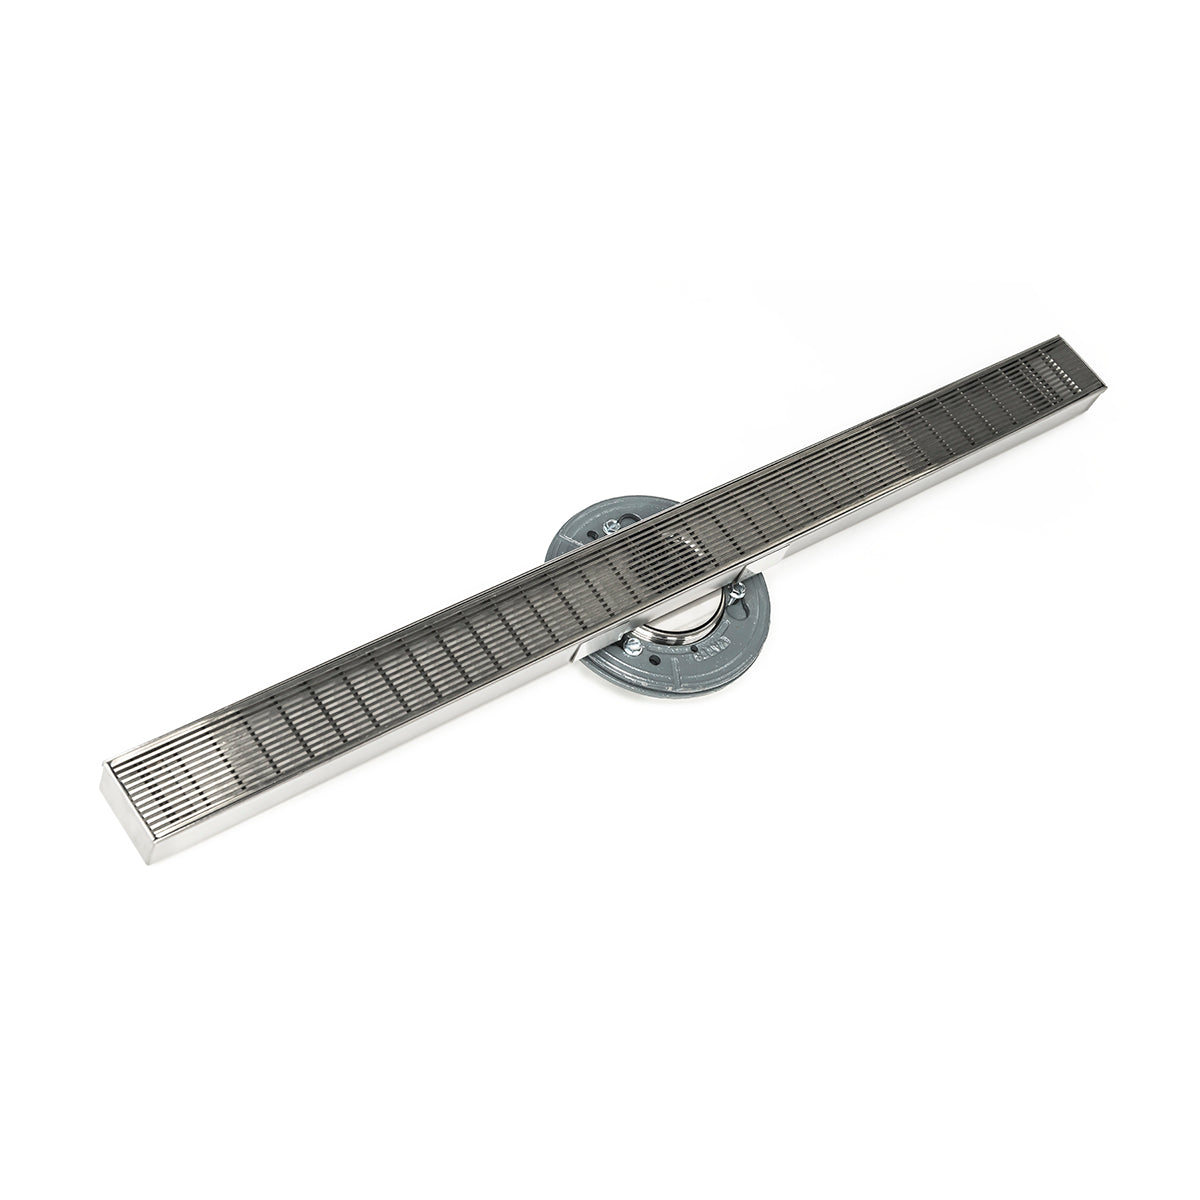 Infinity Drain 72" S-Stainless Steel Series High Flow Site Sizable Linear Drain Kit with 2 1/2" Wedge Wire Grate with ABS Drain Body, 3" Outlet